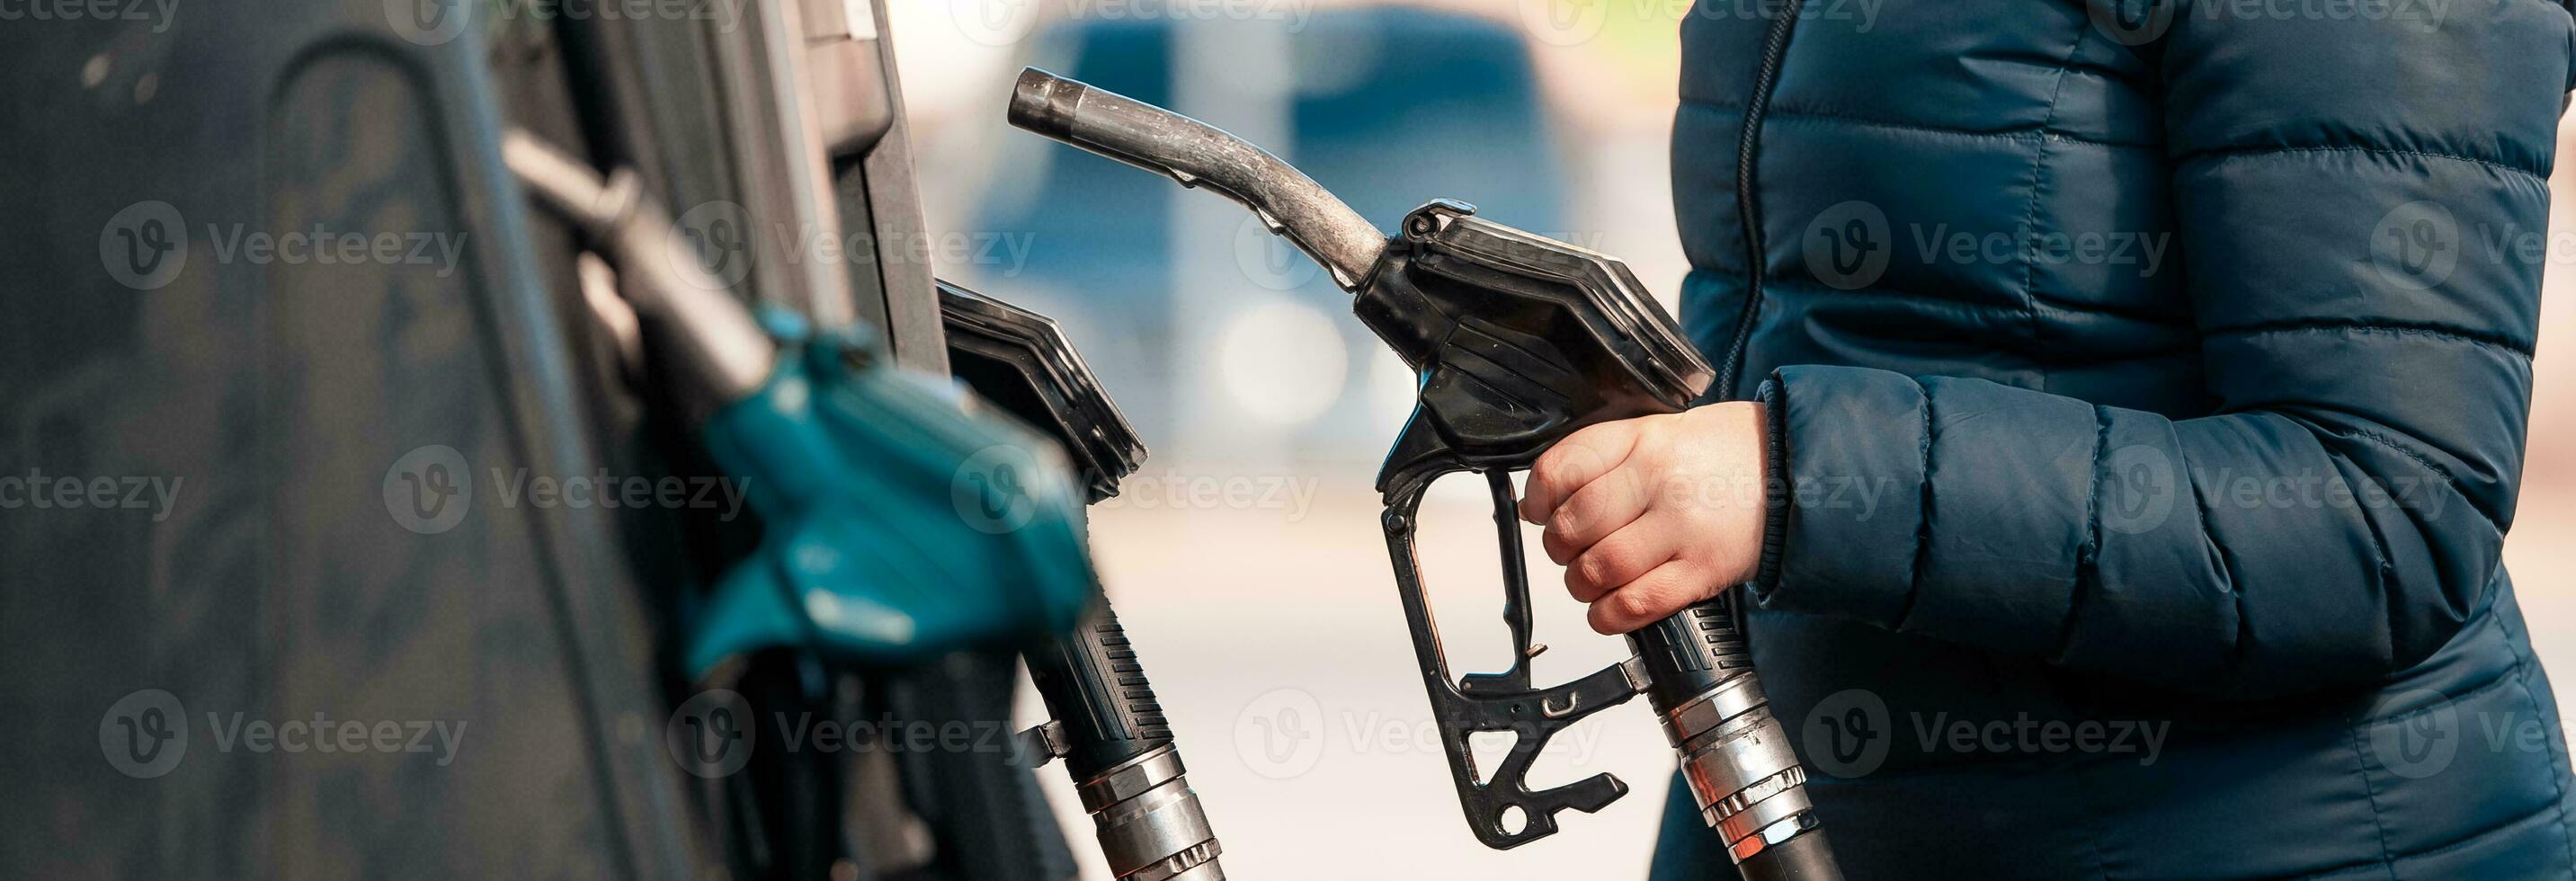 High prices of petrol and diesel fuel ath the petrol station, young woman refueling the car, economic crisis concept photo